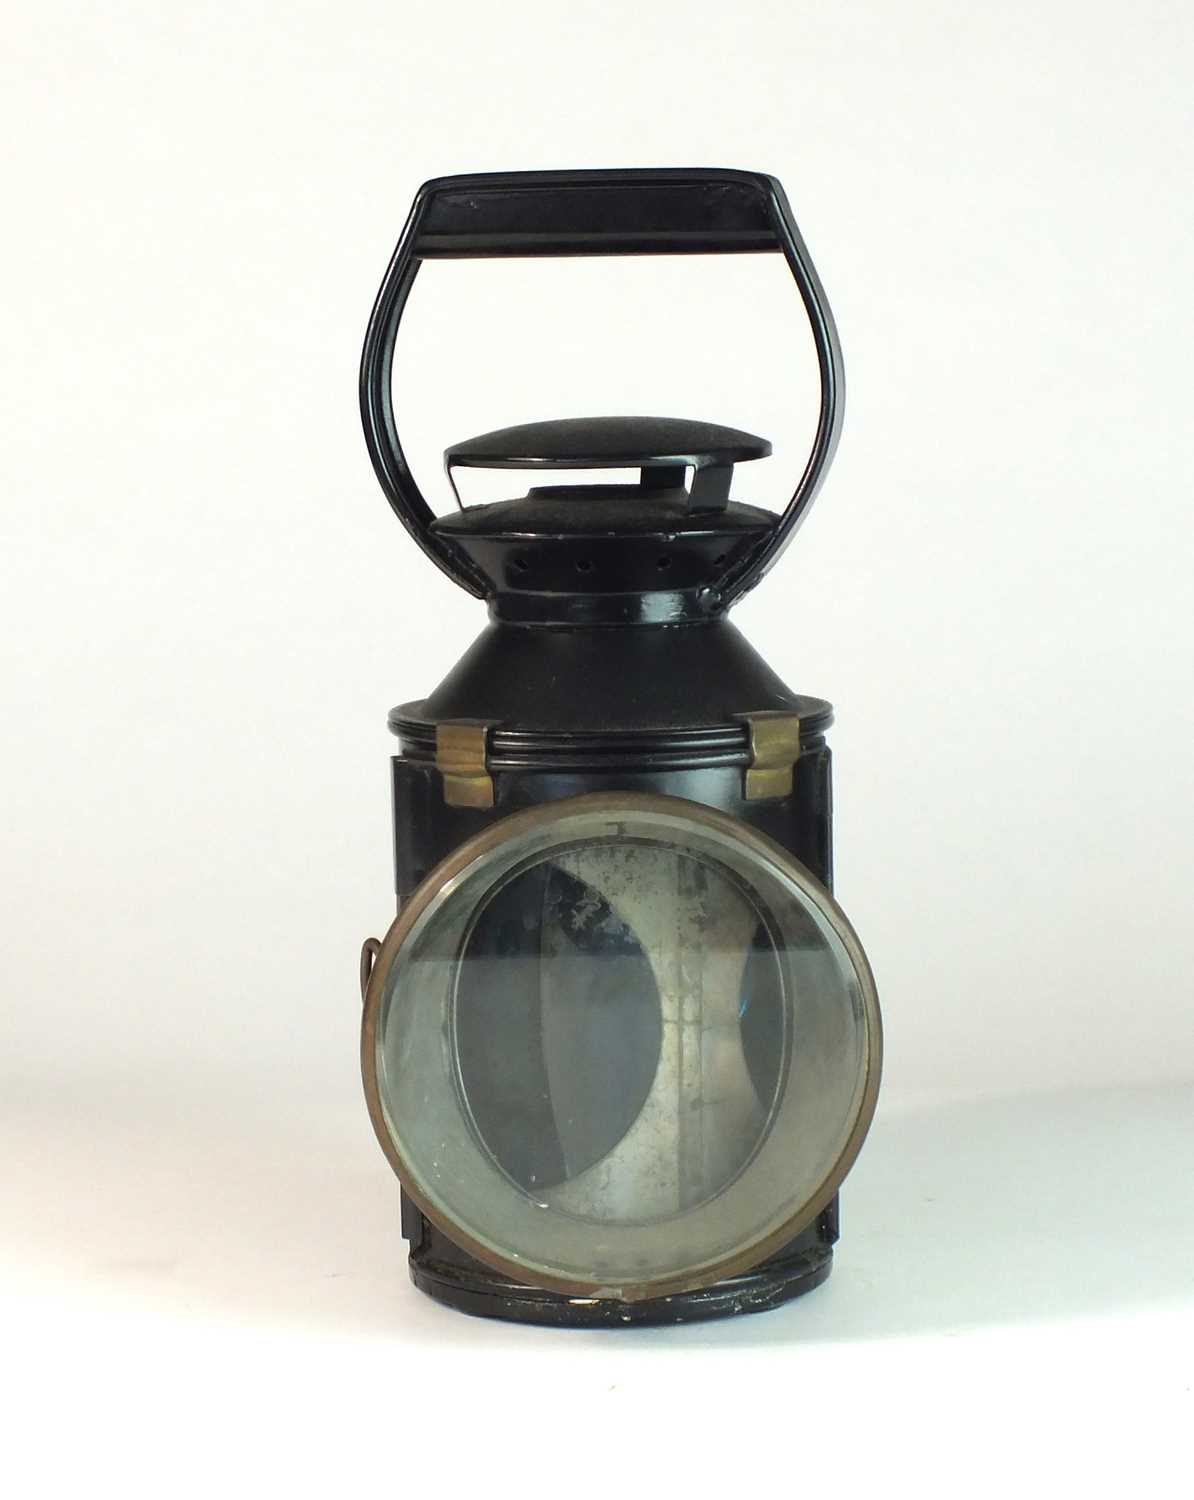 A British Railway metal lantern, probably a reproduction - Image 2 of 4